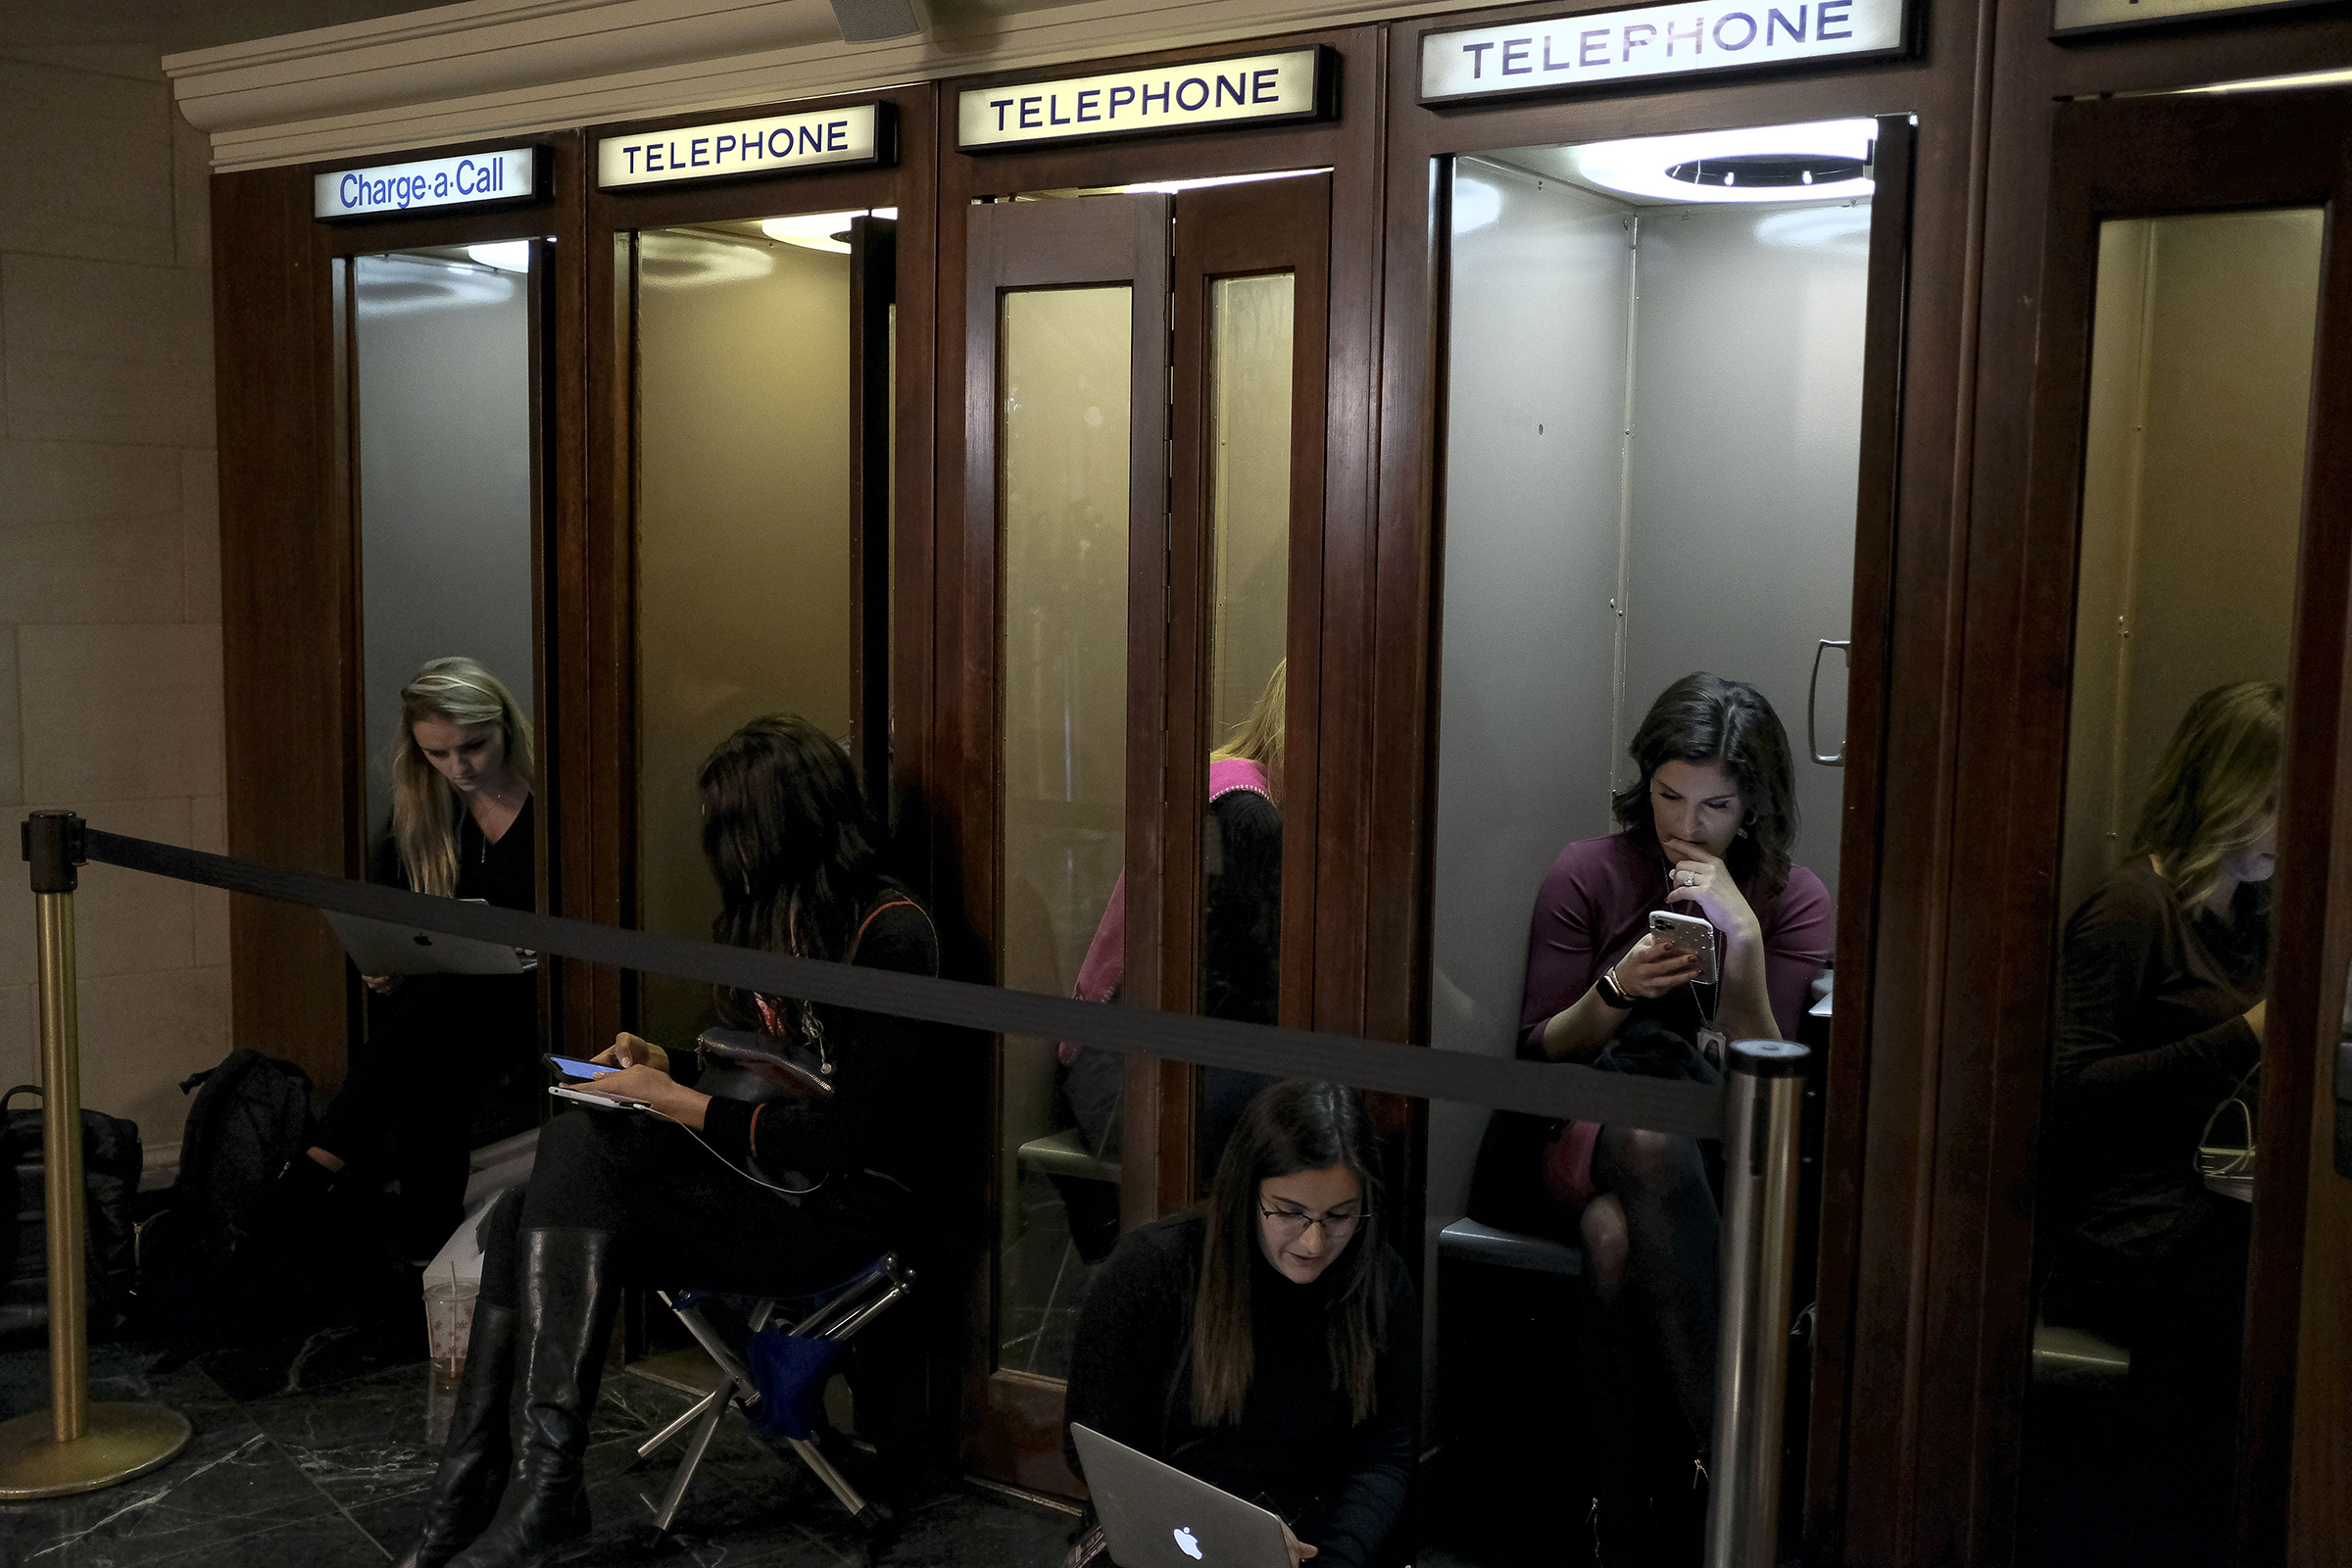 11/19/19, Capitol Hill, Washington, D.C. Members of the press sit in phone booths outside the House Intelligence Committee room during the hearing on the impeachment inquiry at the Longworth House Office building on Capitol Hill in Washington, D.C. on Nov. 19, 2019.Gabriella Demczuk / TIME